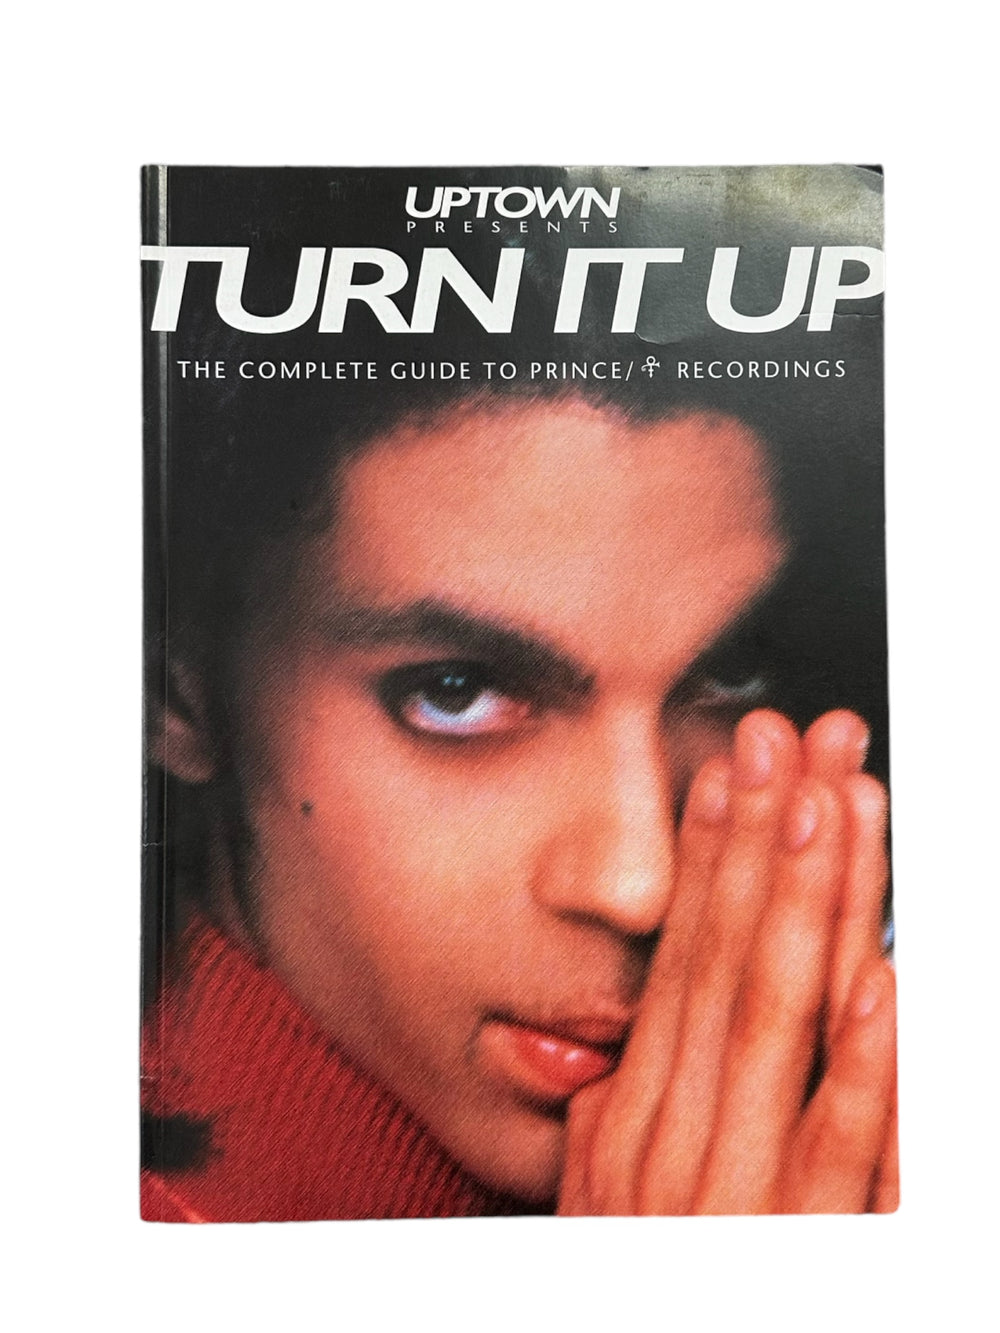 Prince – Turn It Up The Complete Guide To Prince Recordings by Uptown 1997